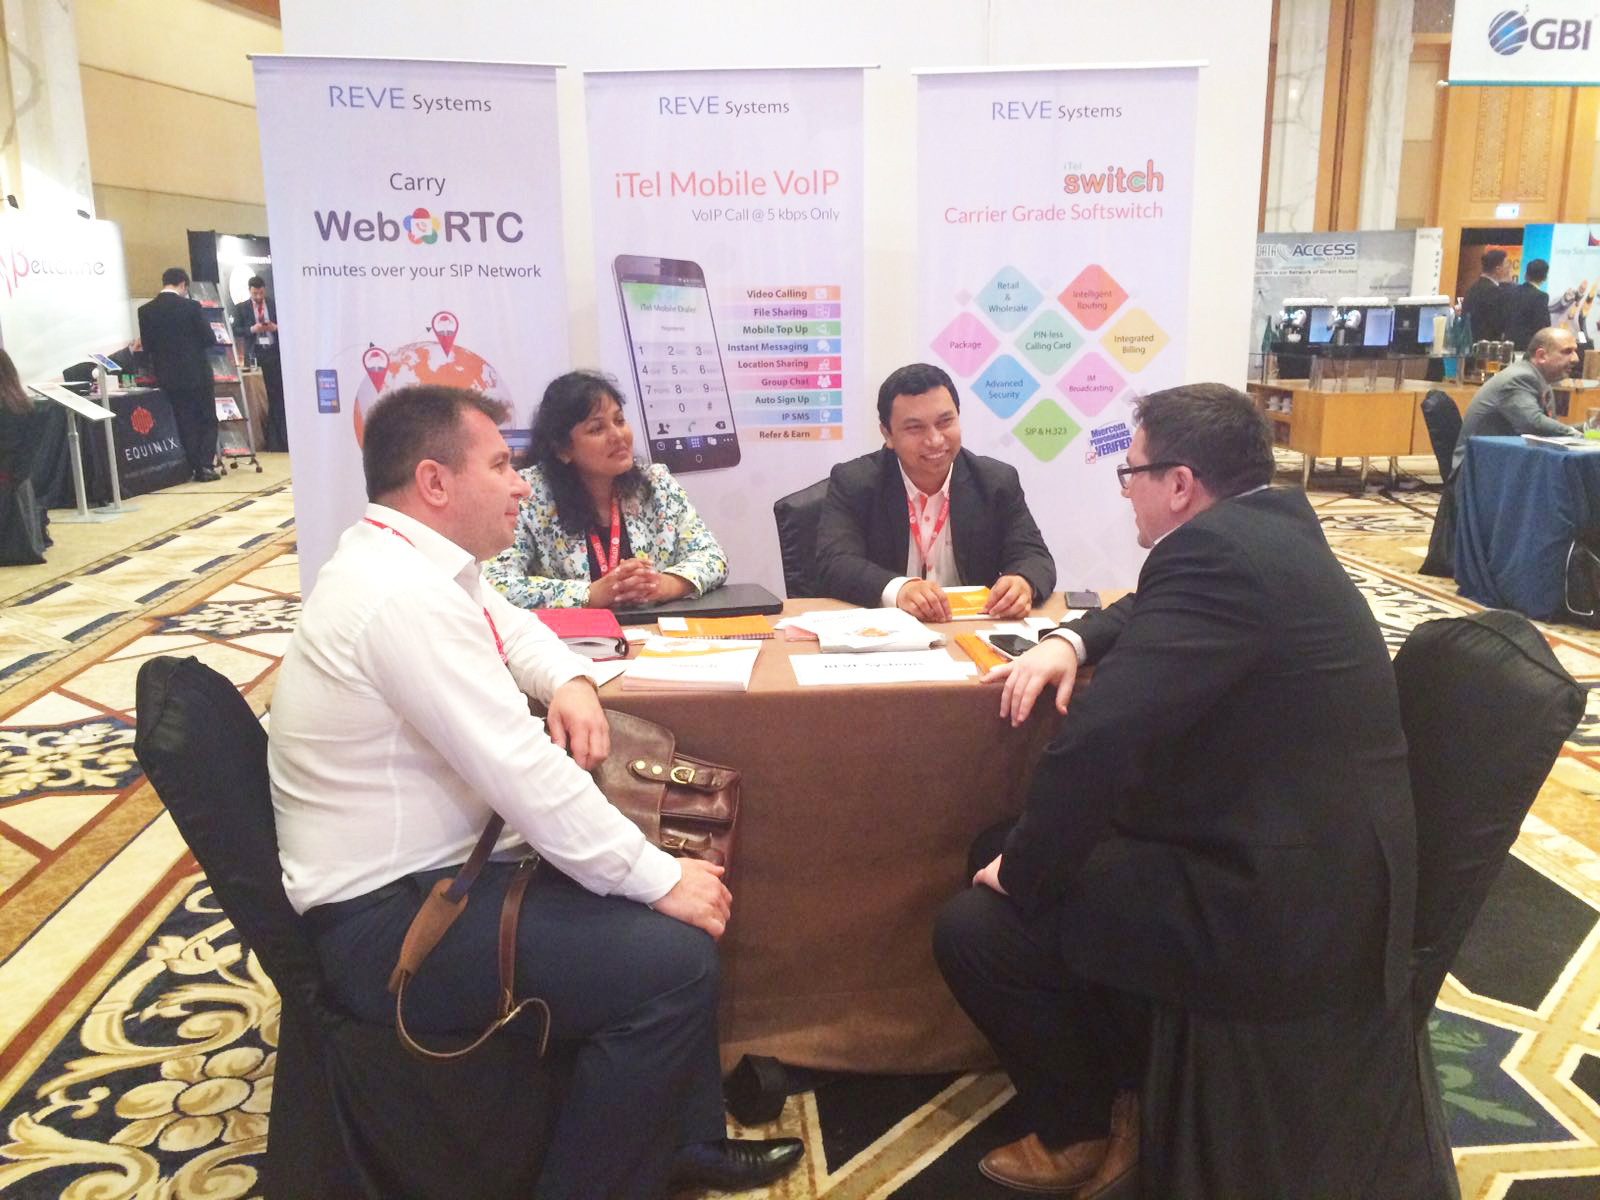 Capacity Middle East 2016, Dubai 1-3 March,Stand# 67